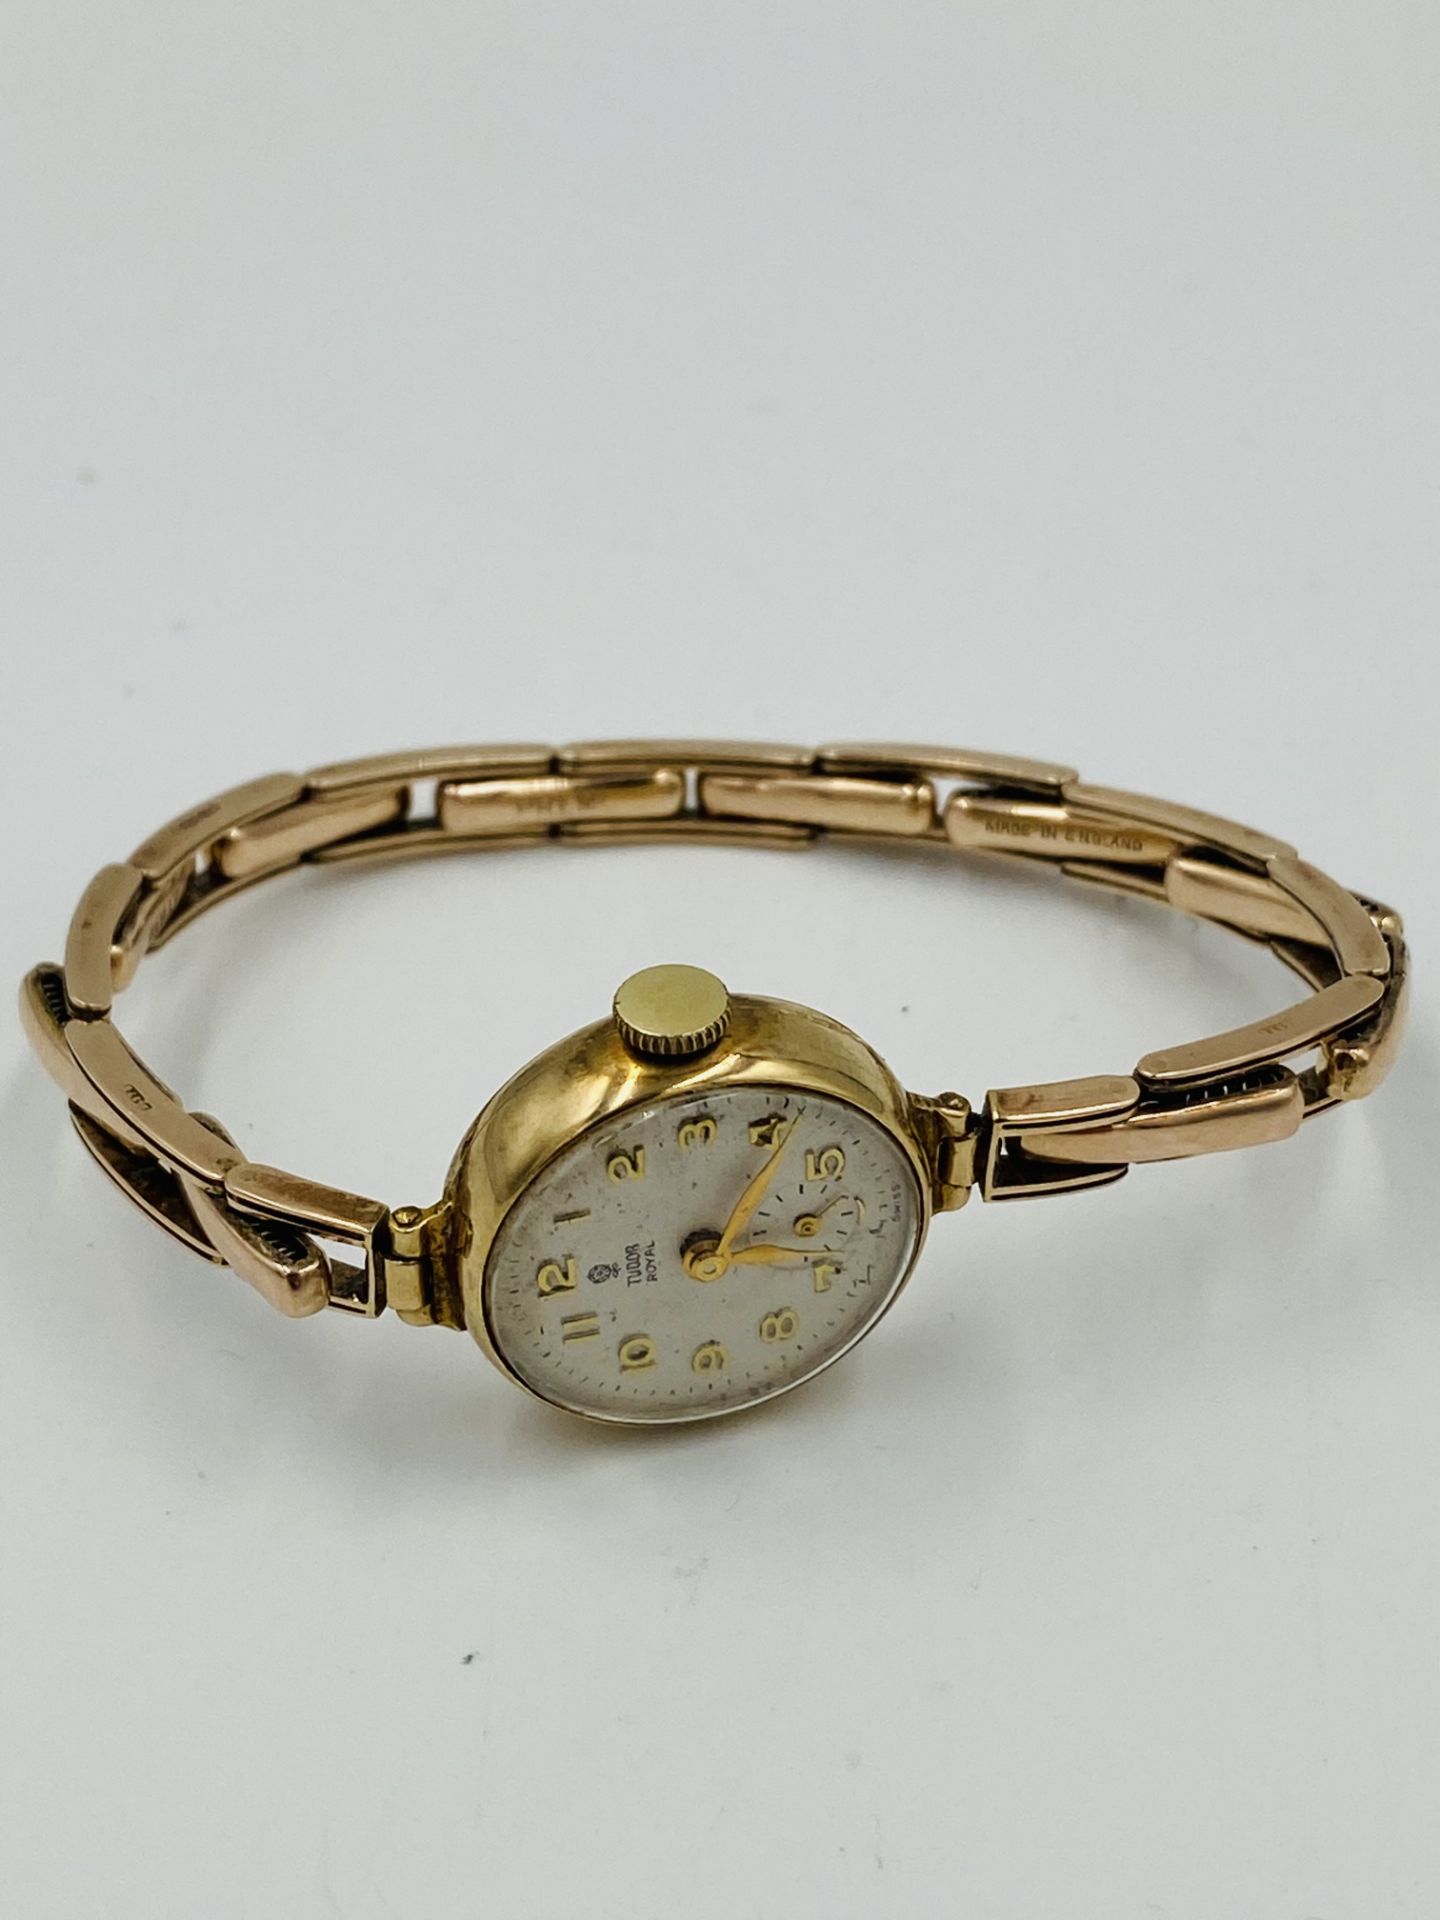 Tudor Royal ladies wrist watch in yellow metal case, on 9ct gold strap - Image 4 of 4